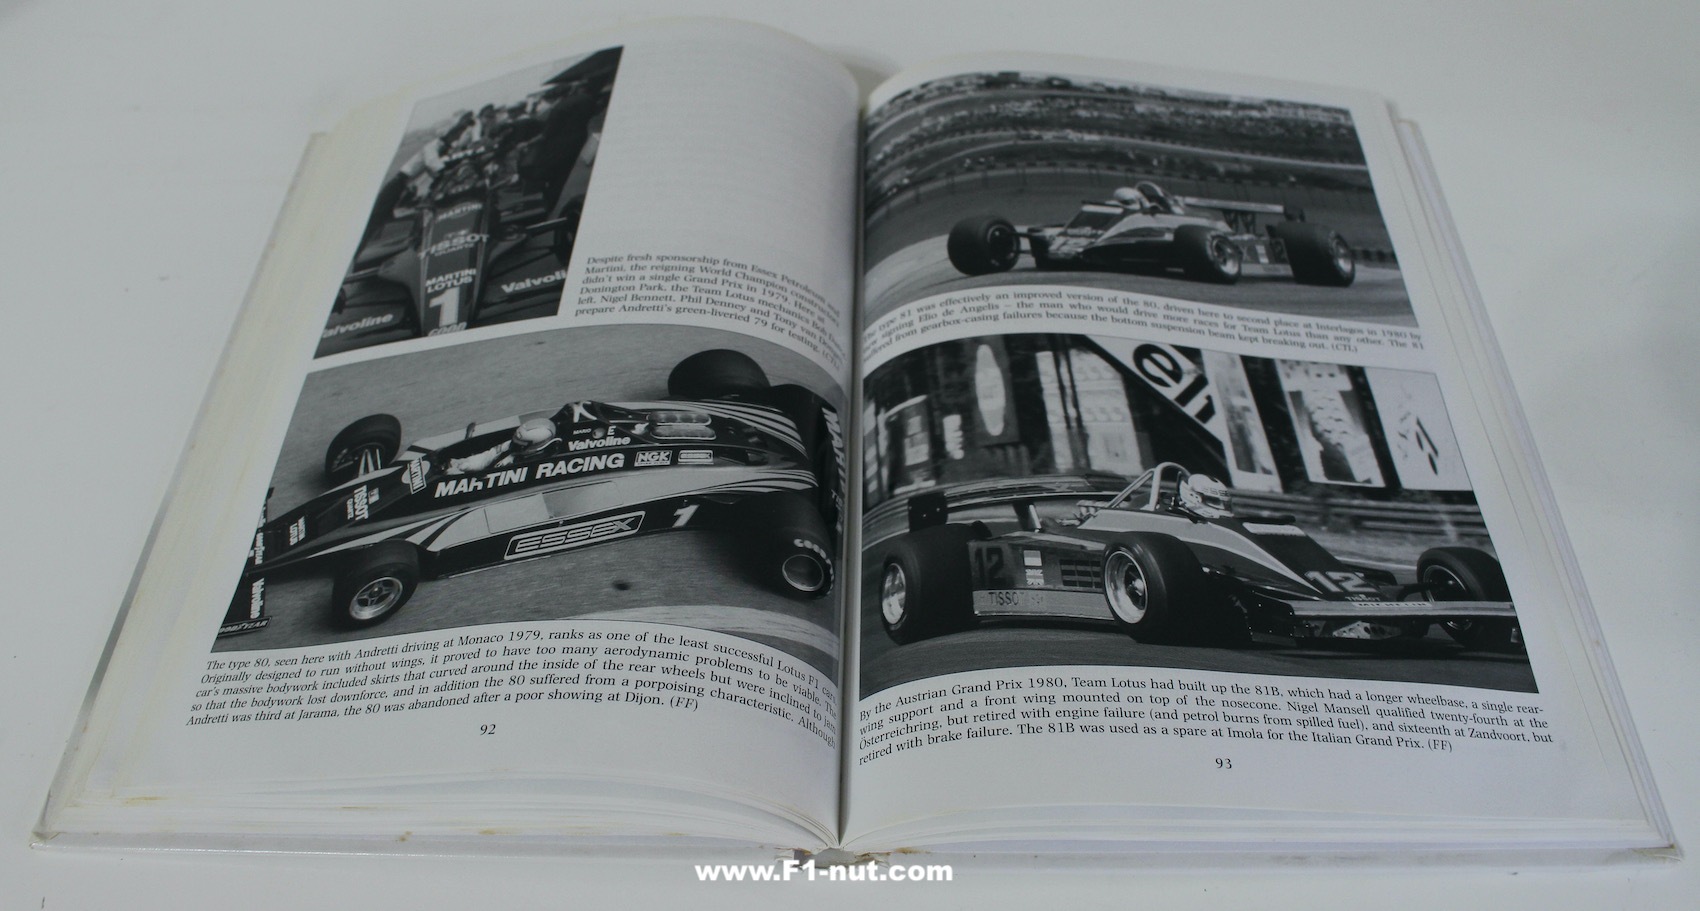 Lotus Racing Cars 1968-2000 book pages | F1-nut.com